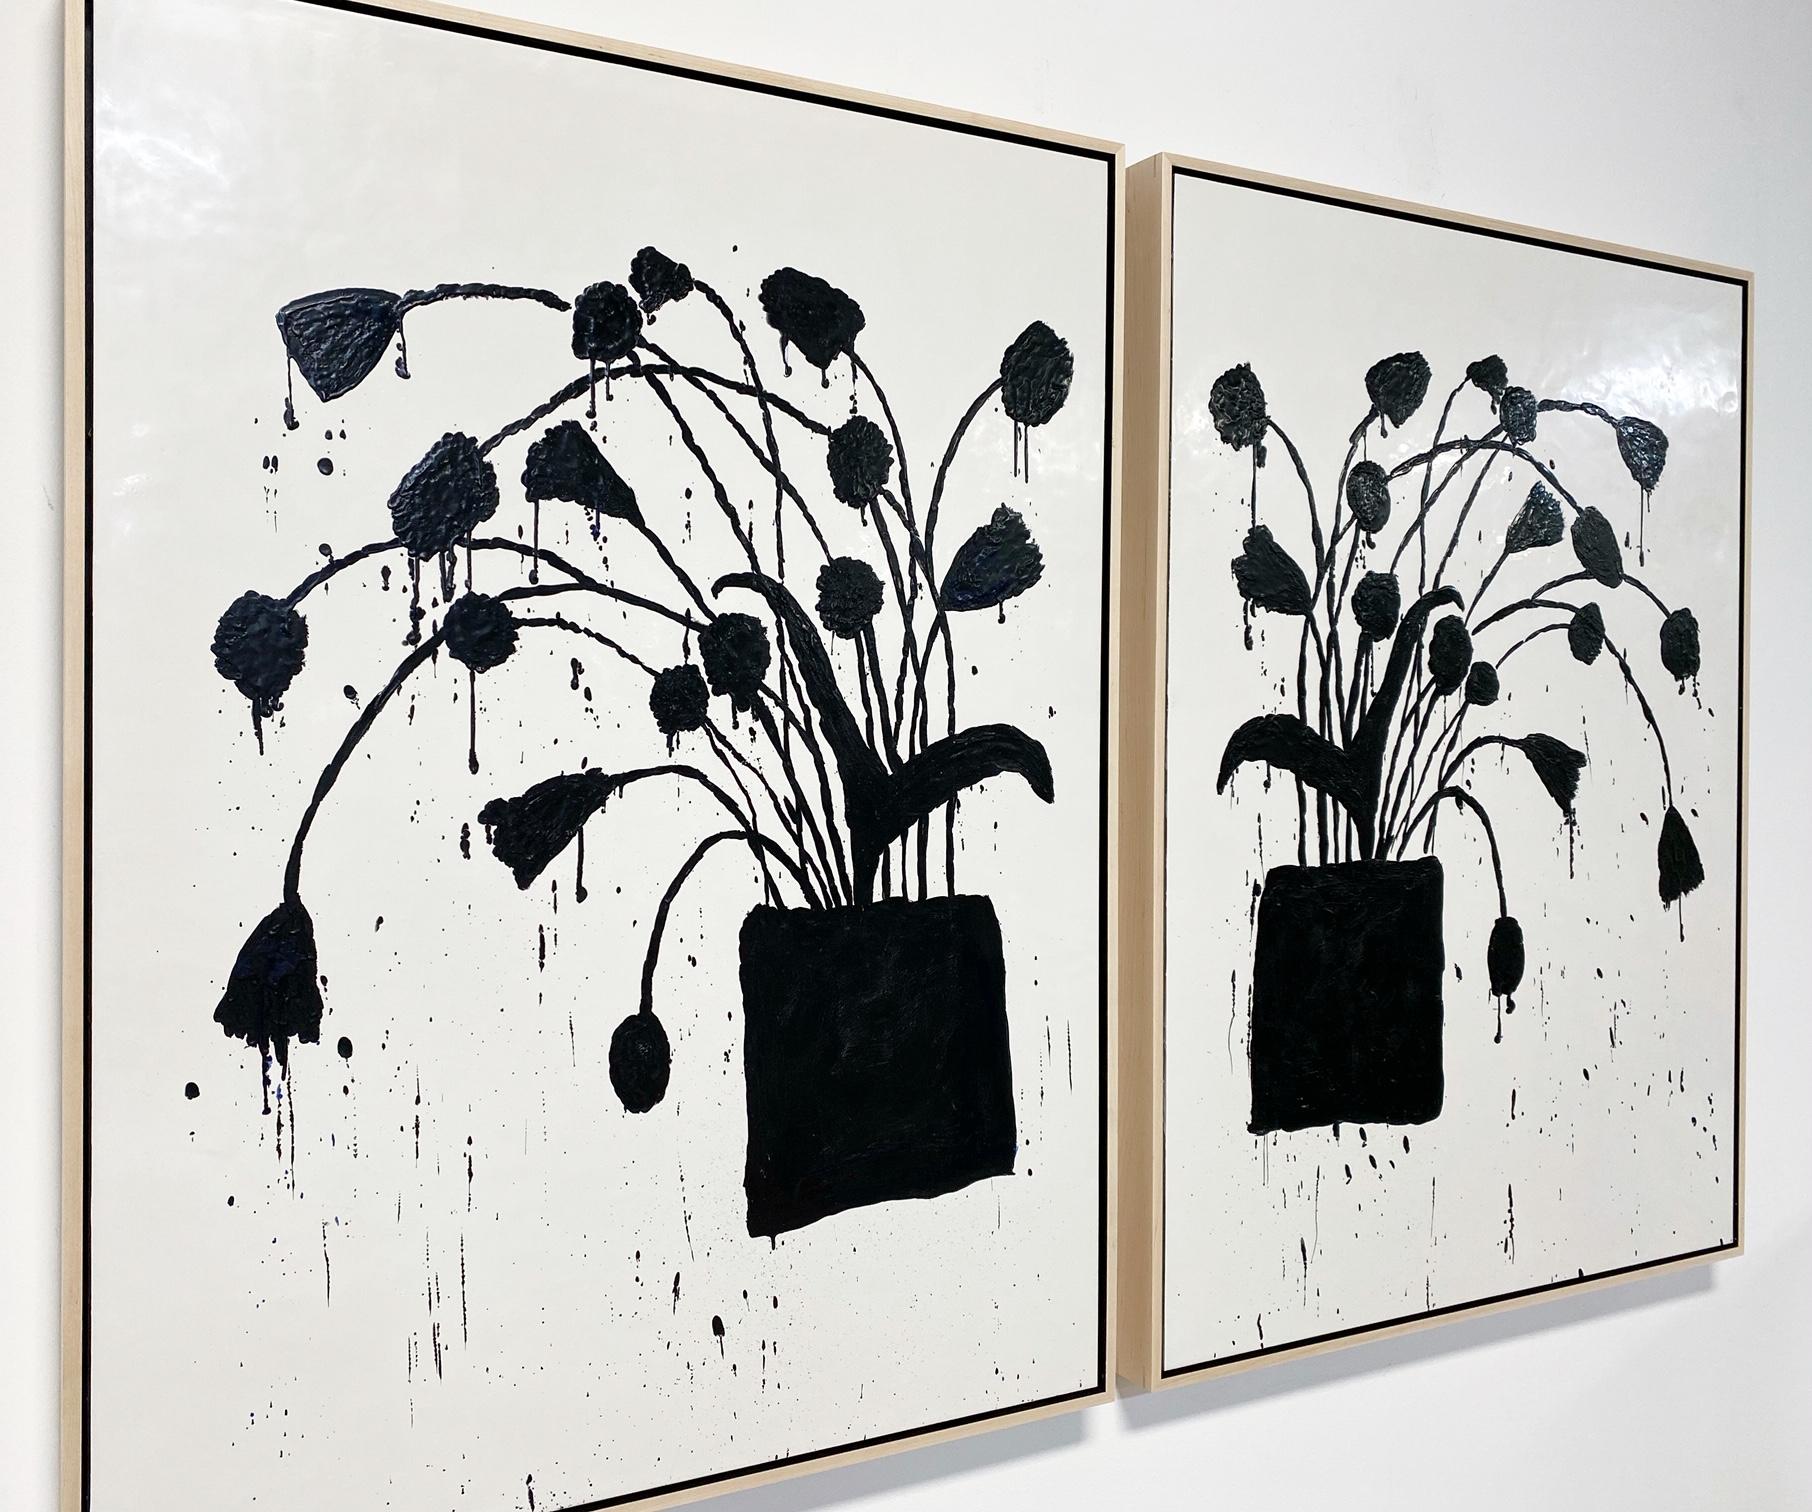 In Botanical series.

Art dimensions: 36 x 48 H inches, each panel
Framed dimensions: 37.5 x 49.5 inches, each panel

Beautiful, custom maple float frame with black interior.

Forsyth is proud to be the exclusive gallery of John O'Hara